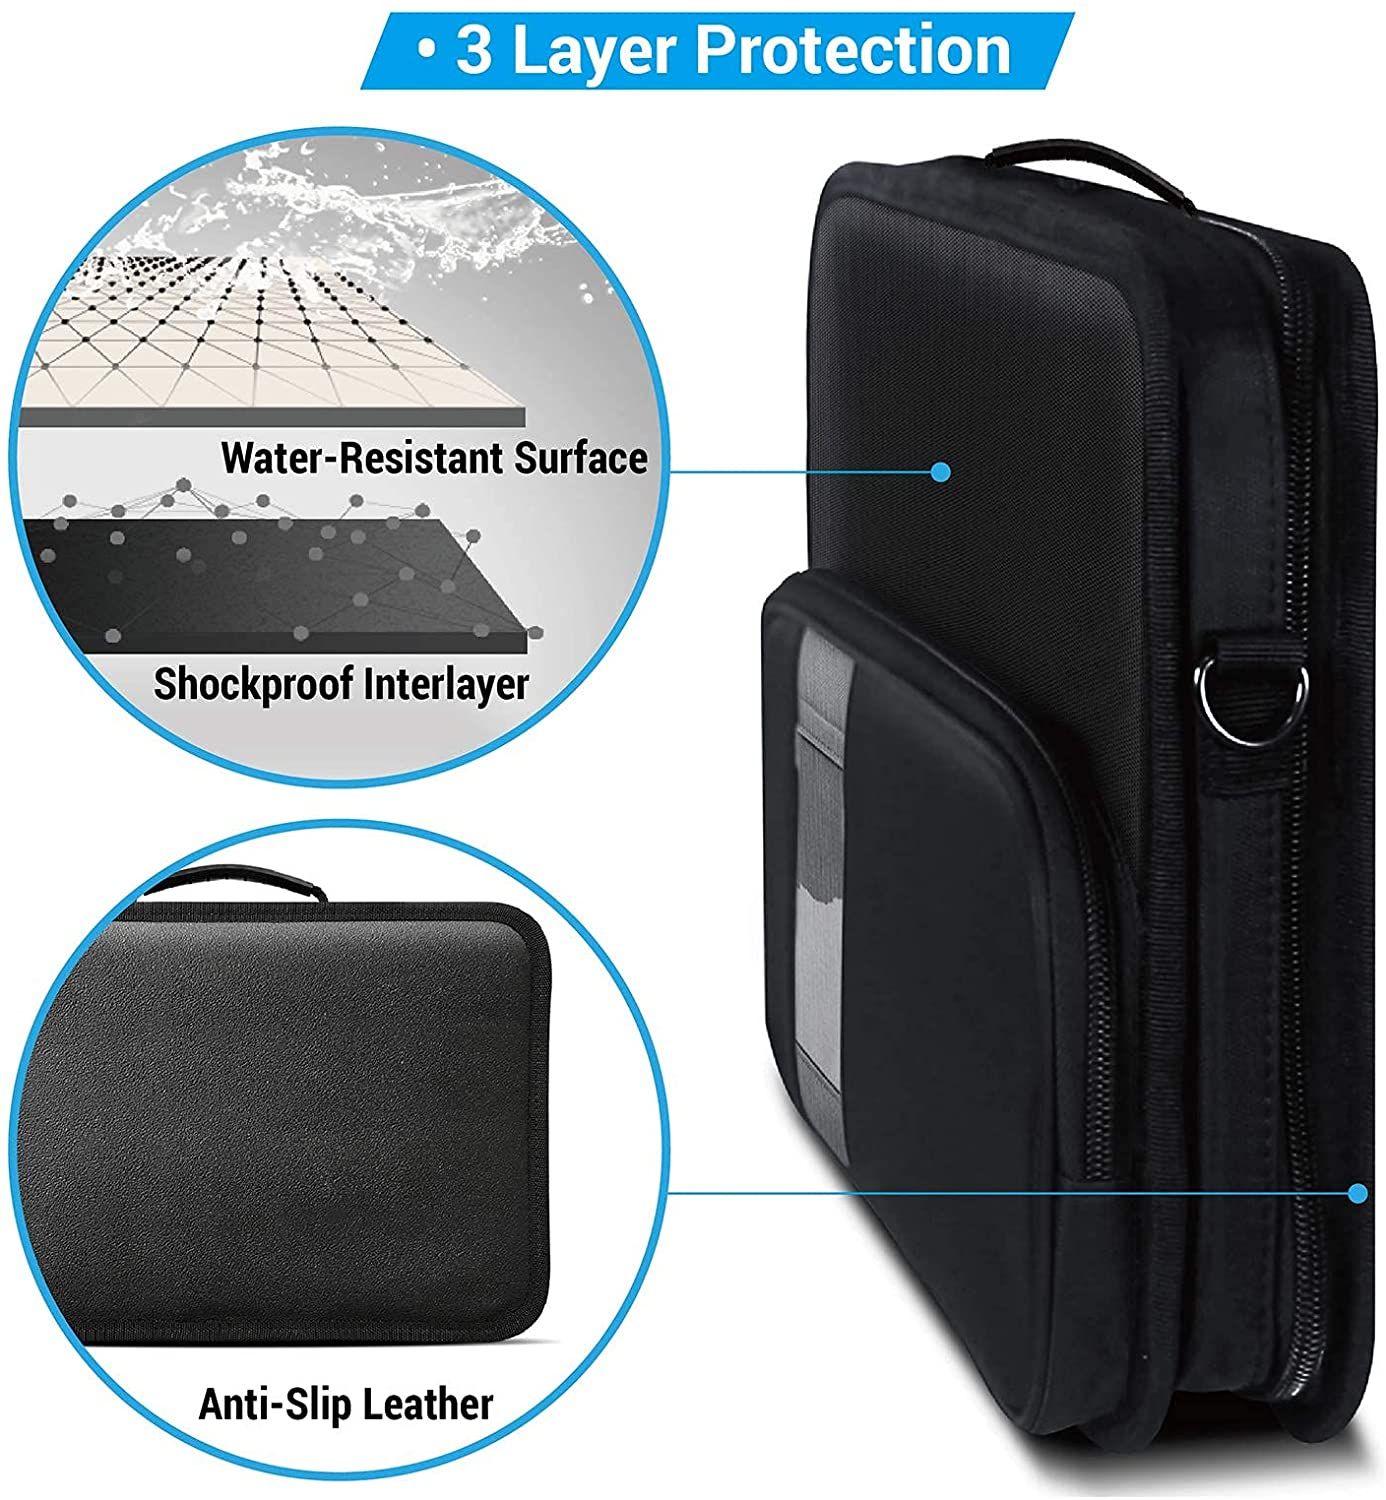 iBenzer Stay In Laptop Sleeve features